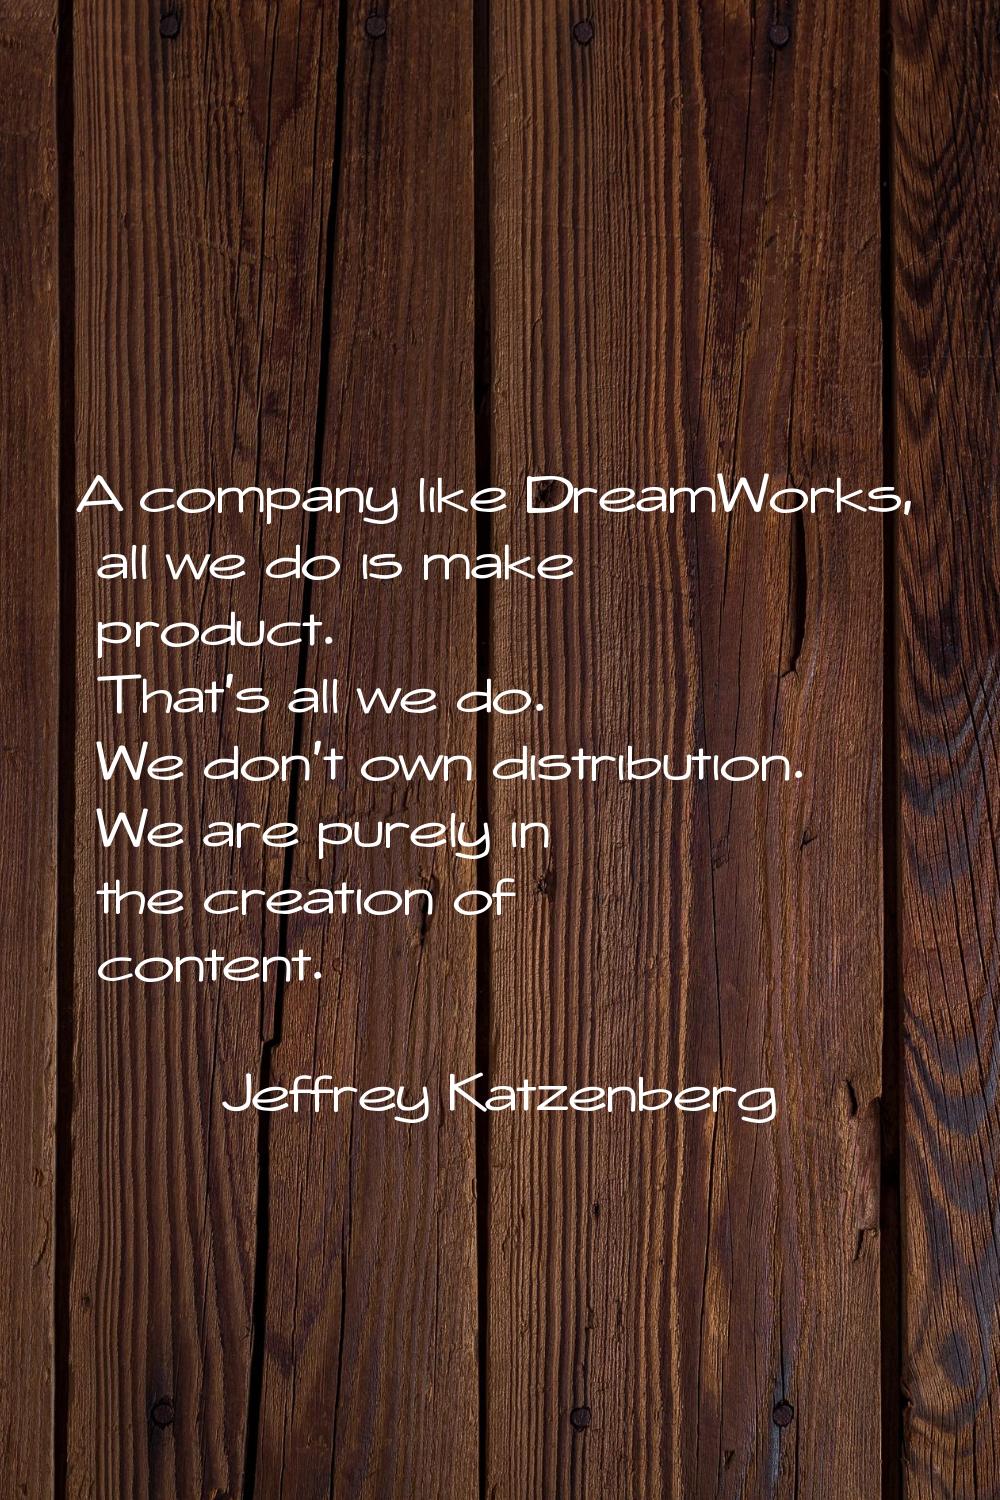 A company like DreamWorks, all we do is make product. That's all we do. We don't own distribution. 